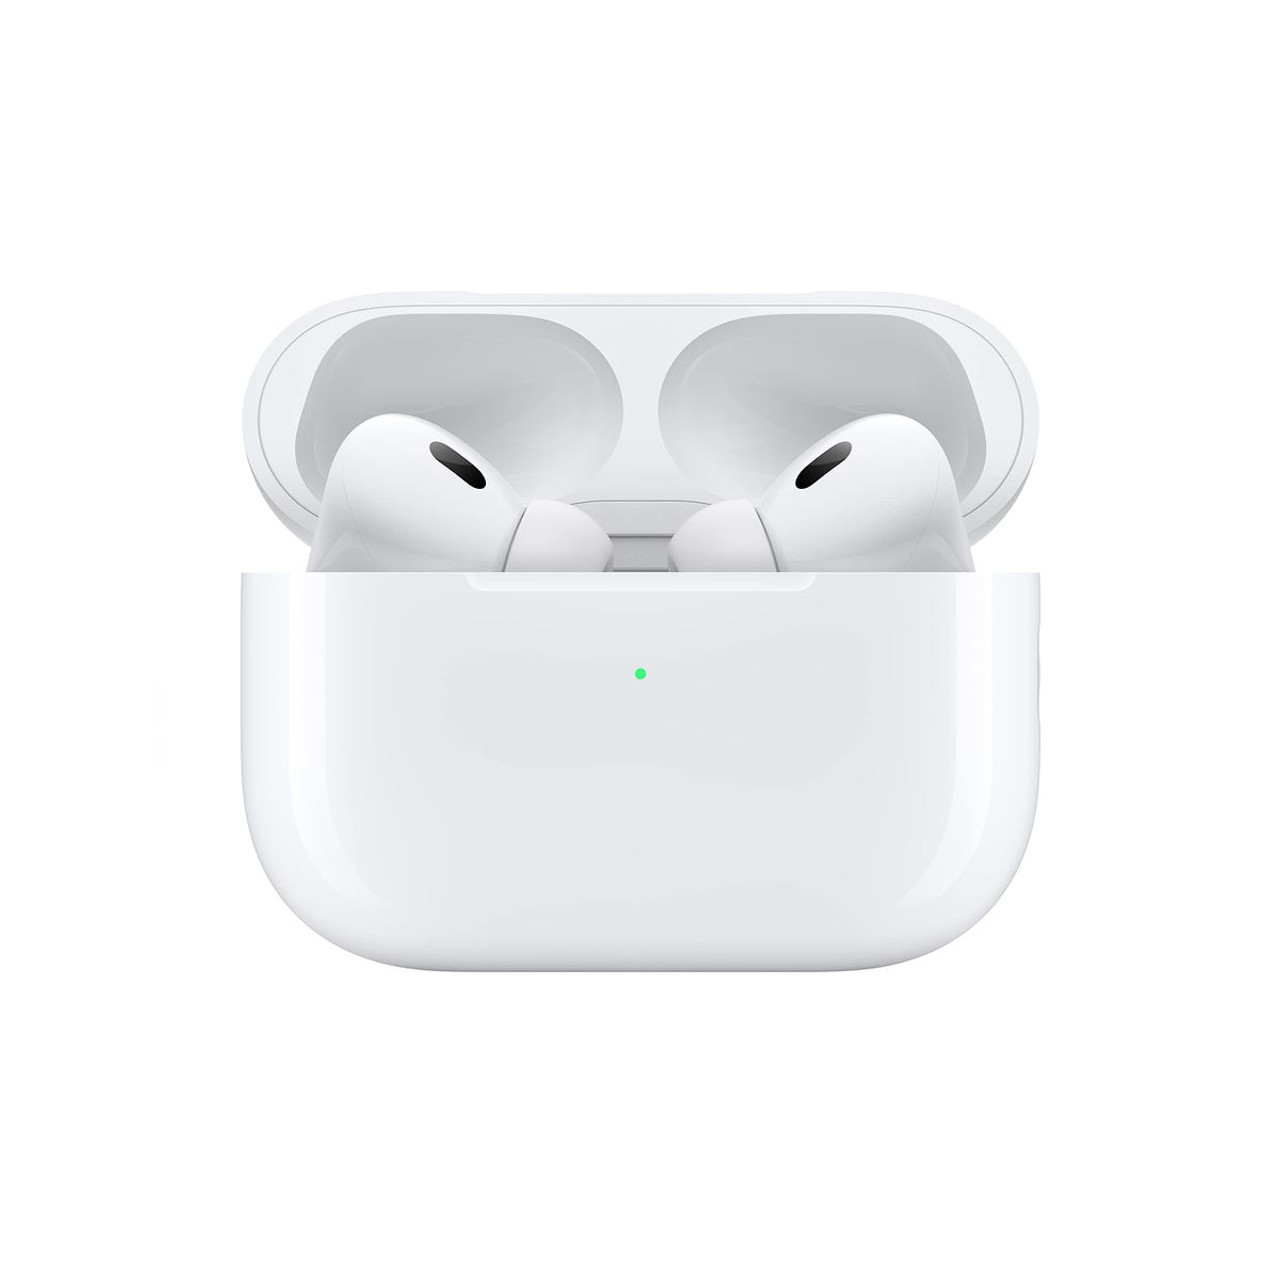 Apple AirPods Pro (Gen 2) Wireless Earbuds product image